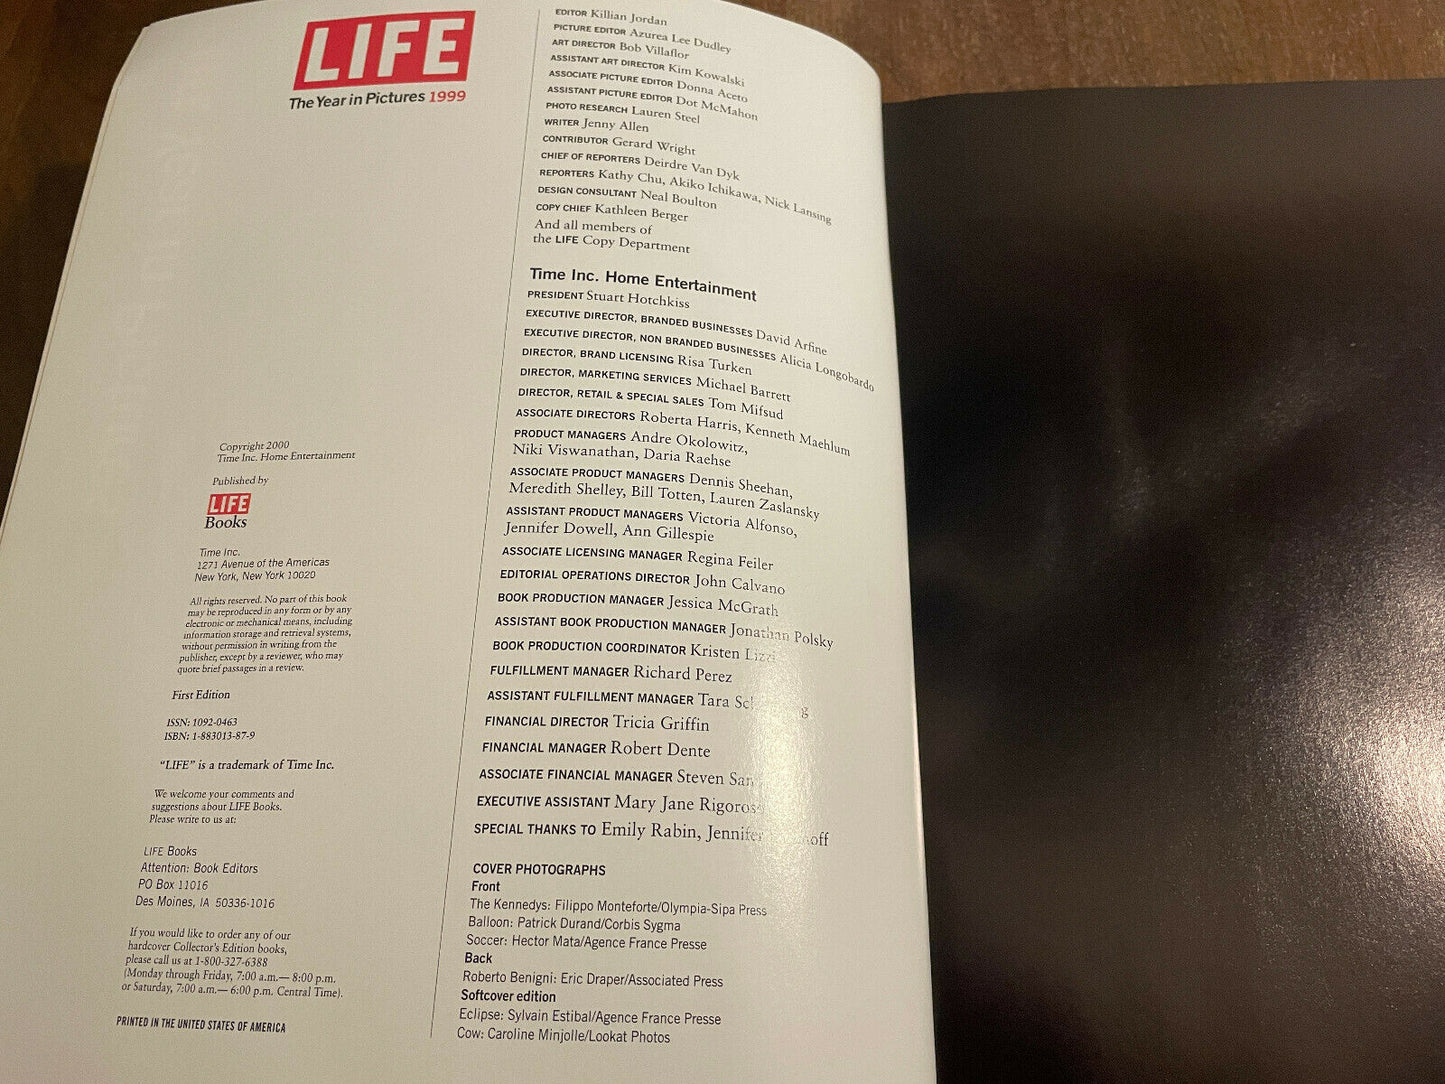 Life Year in Pictures: The 1999 Album by Life Magazine Editors (1A)